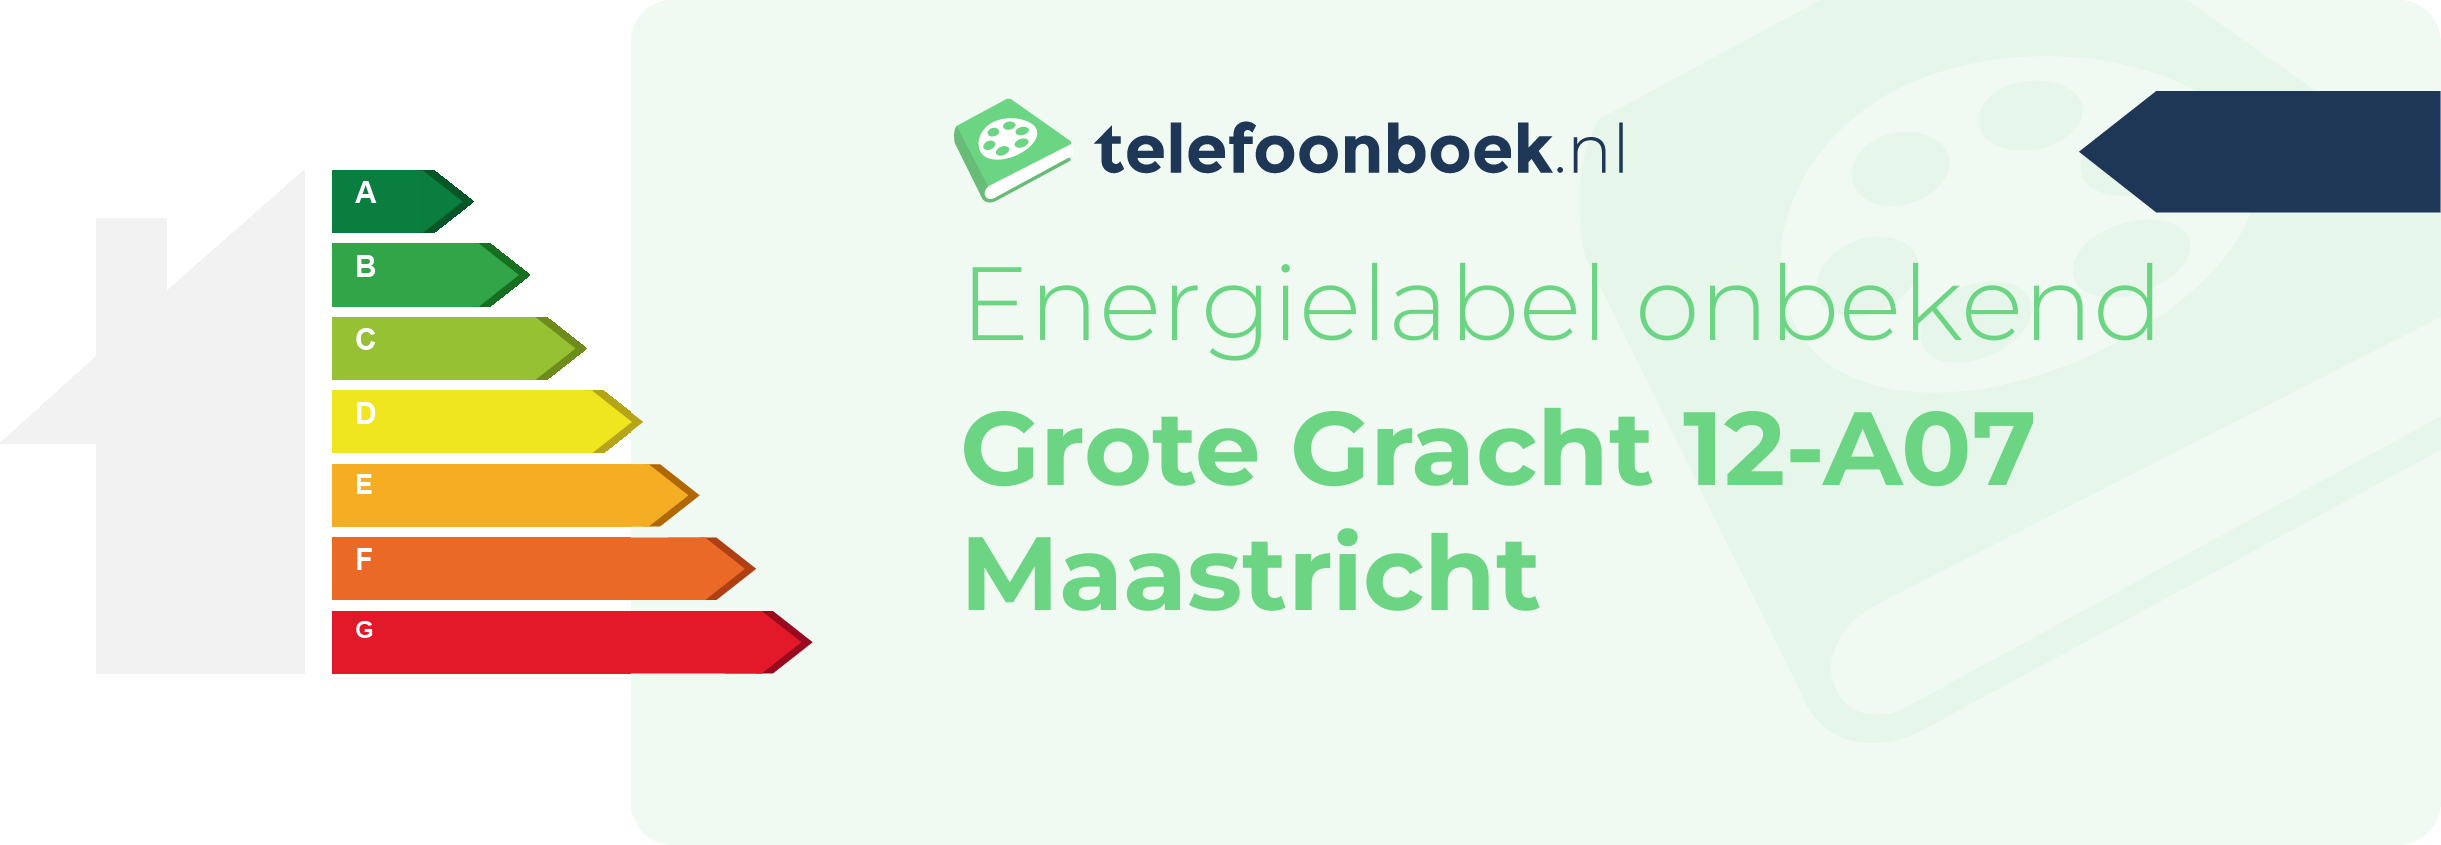 Energielabel Grote Gracht 12-A07 Maastricht